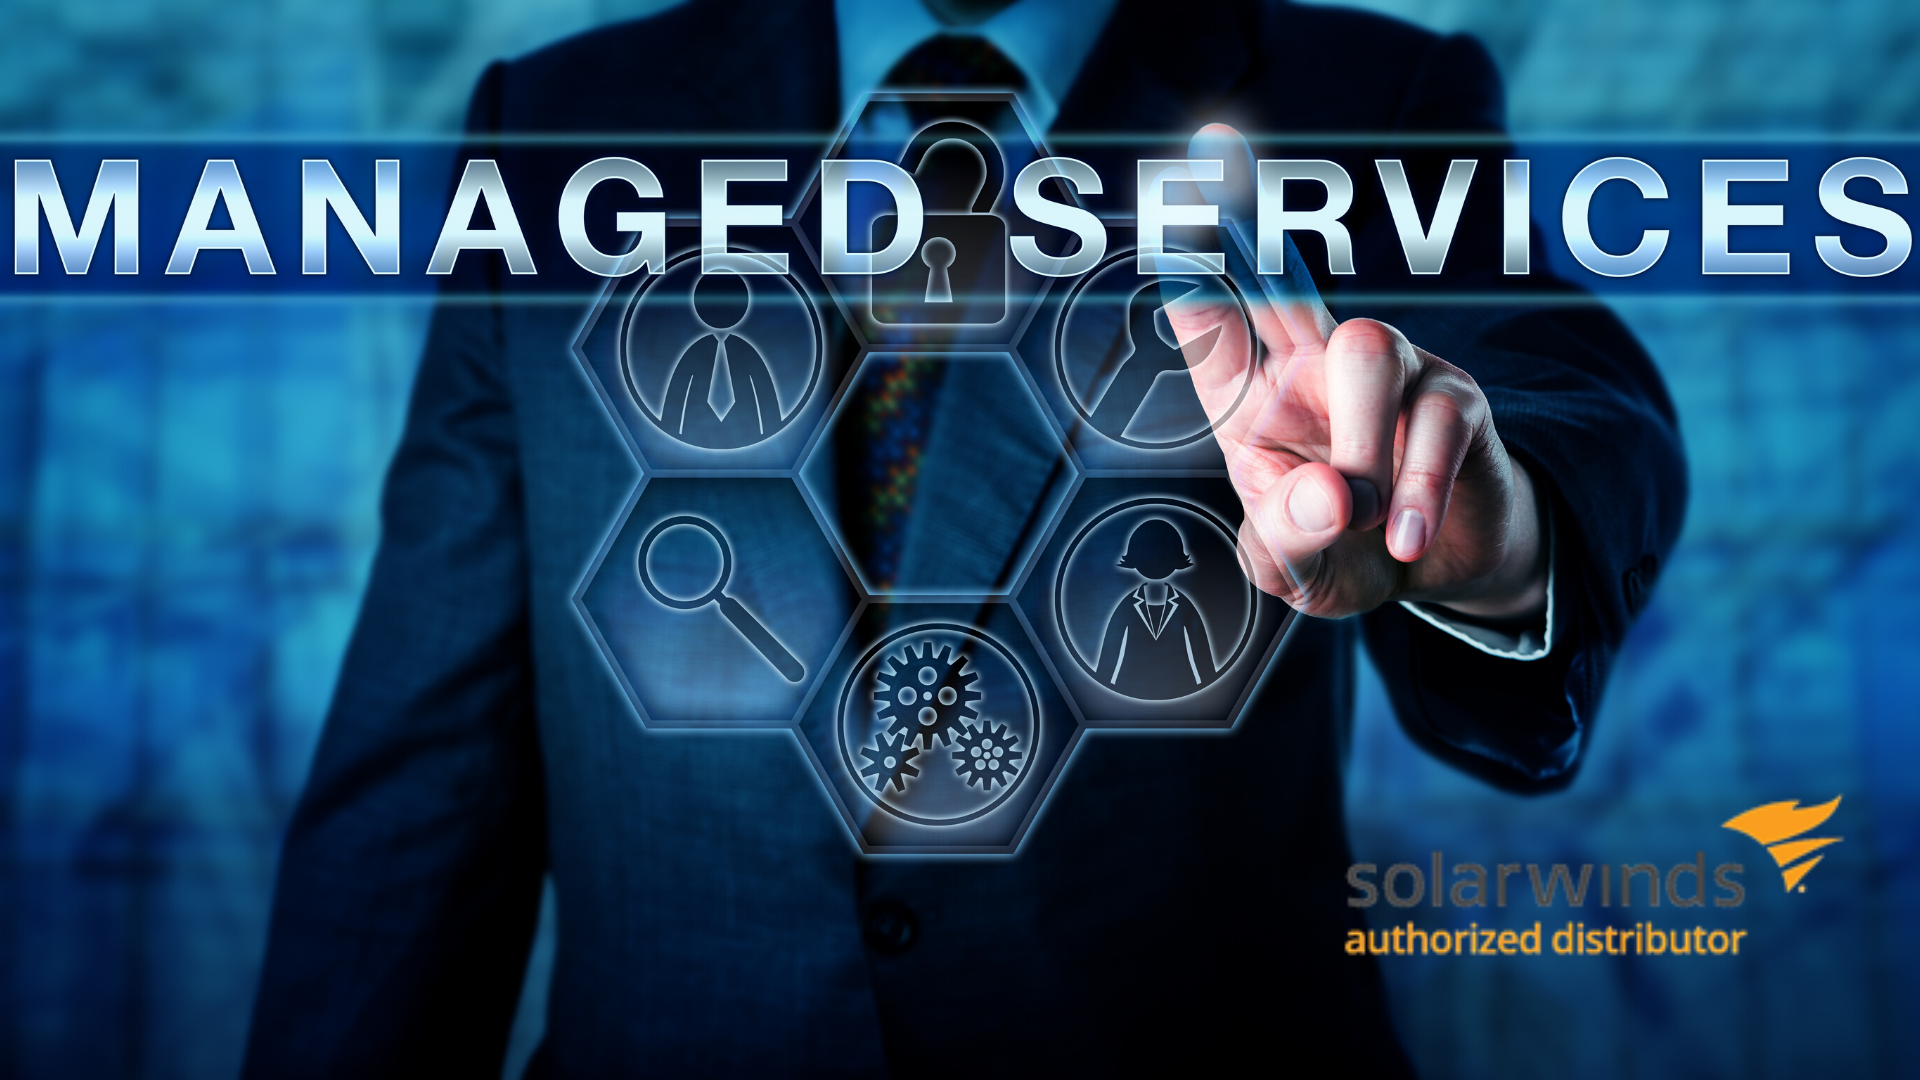 SolarWinds Managed Services by Adfontes Software